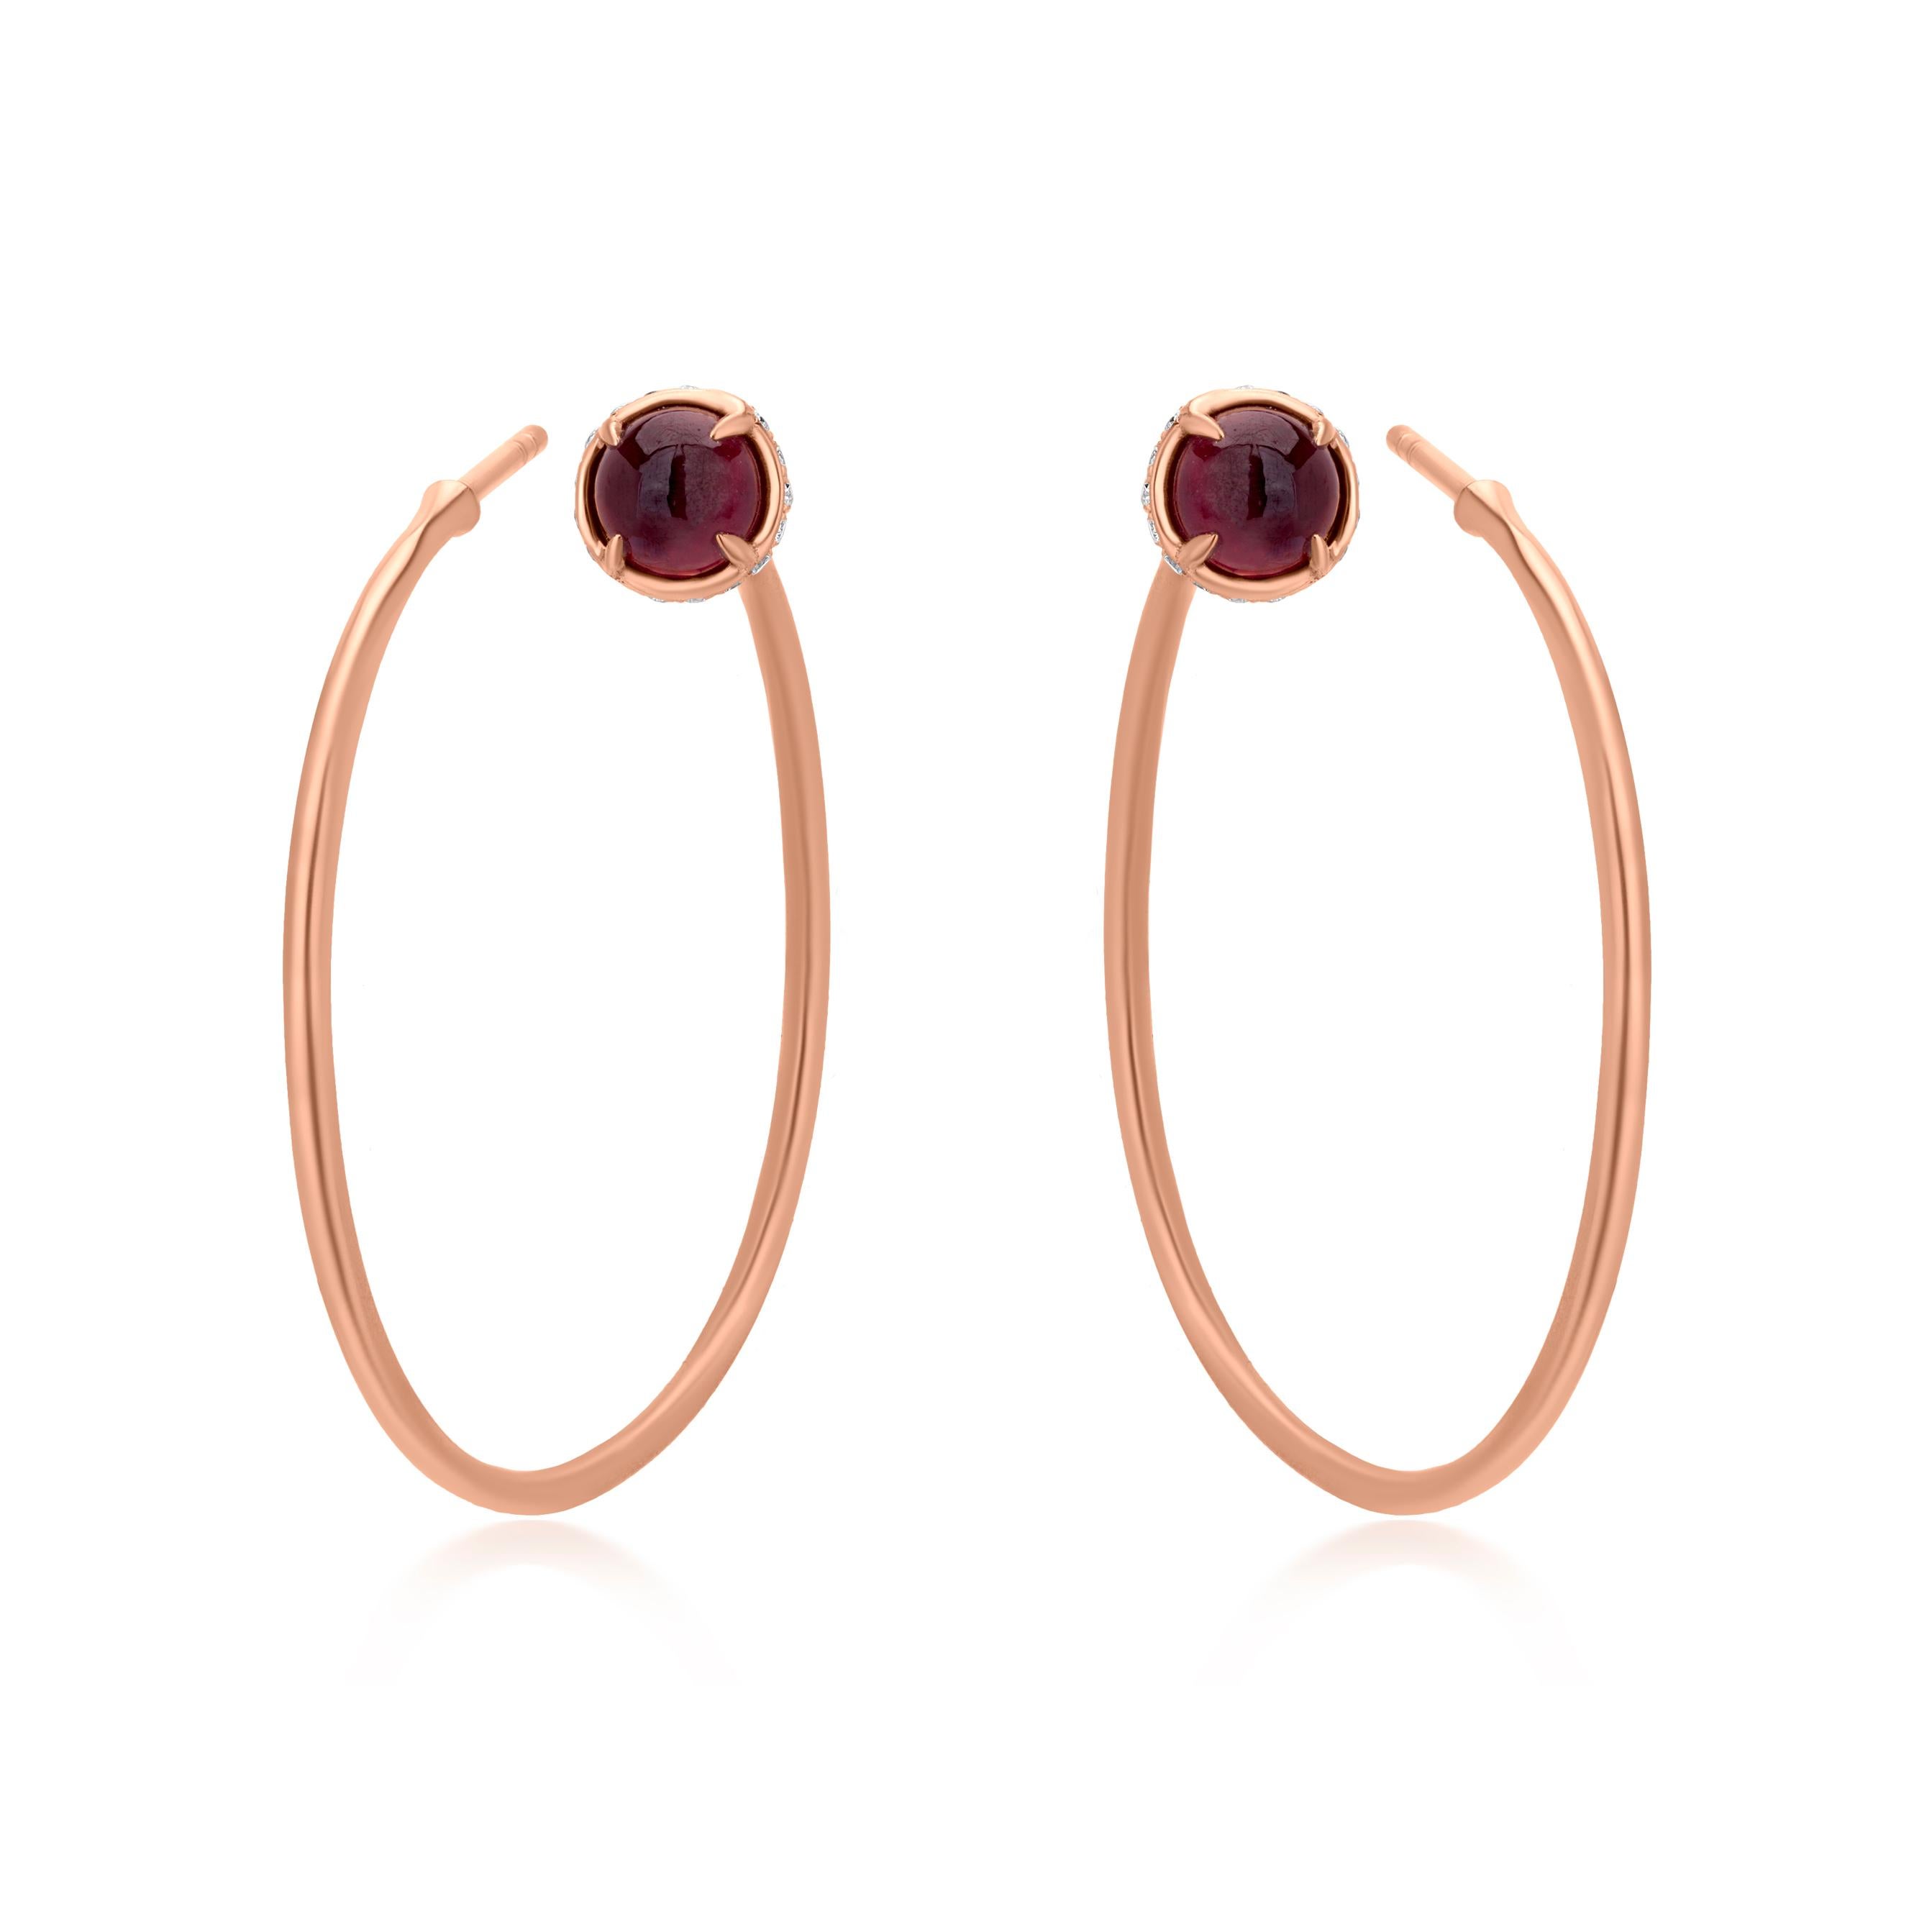 A sleek V-style shaped hoop Post & clutch 18K Rose Gold earring pair have a round-cabochon Ruby stones on the part of each piece that will sit on the earlobe. Set in a prong, the Ruby stones are well-complemented by round full-cut Diamonds in a